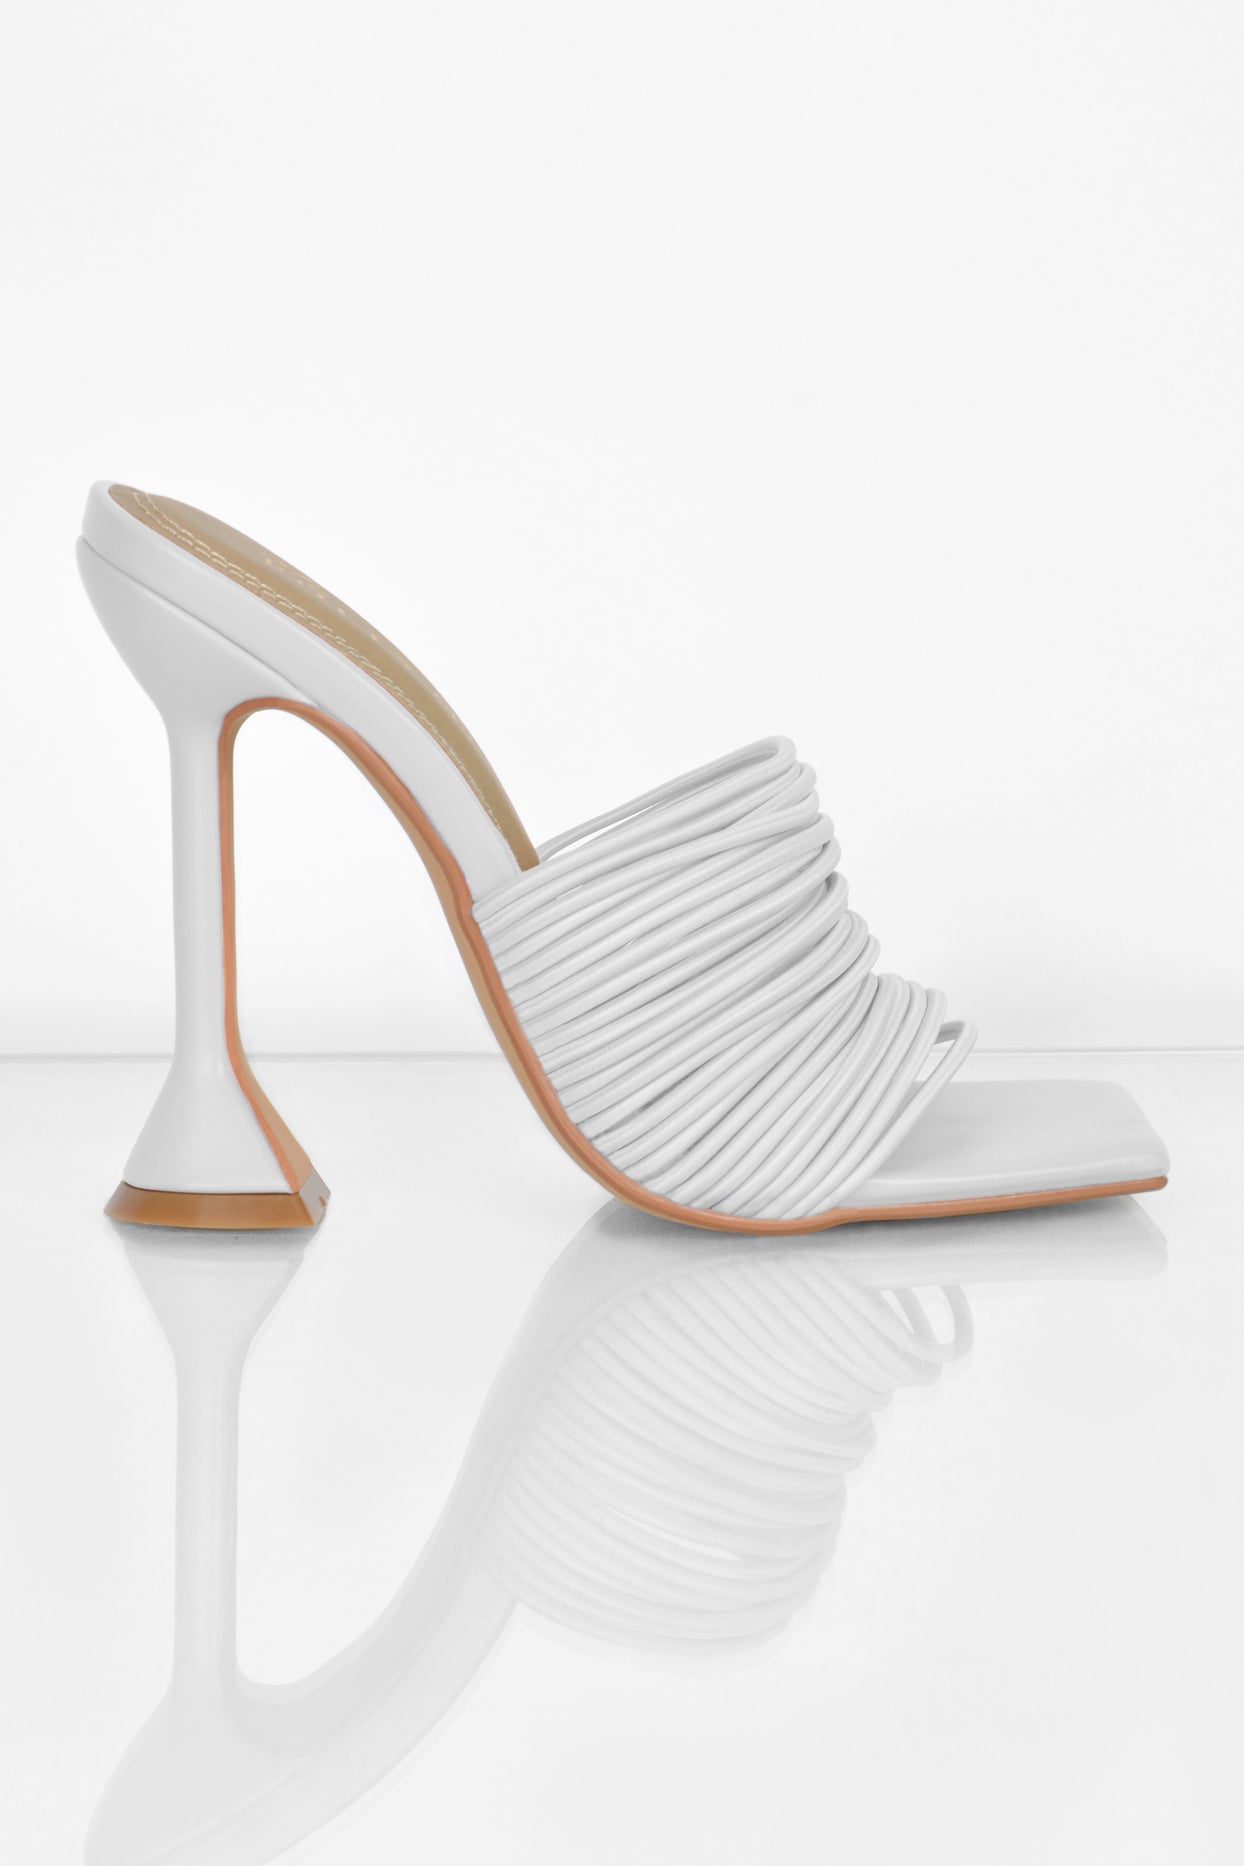 Through The Wire Multi Strap Mule Heels in White